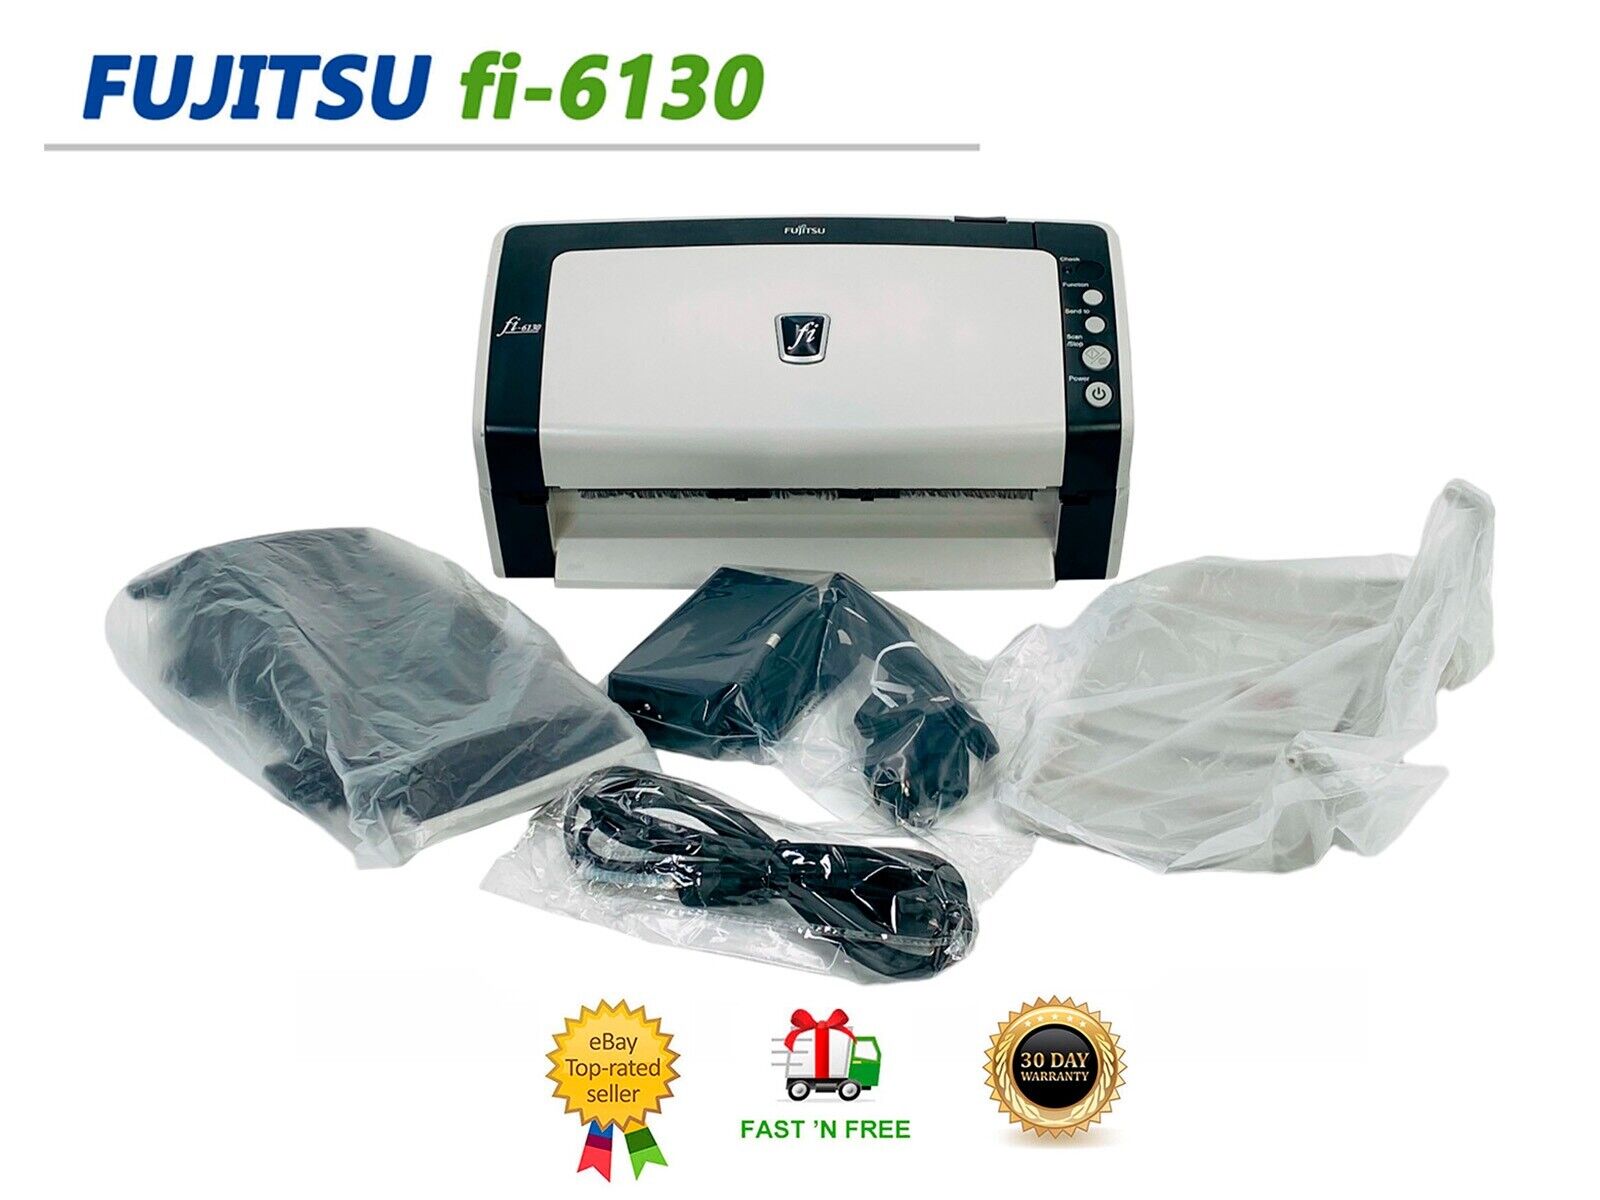 Fujitsu FI-6130 Duplex Document Color Scanner New Rollers New Trays New Adapter